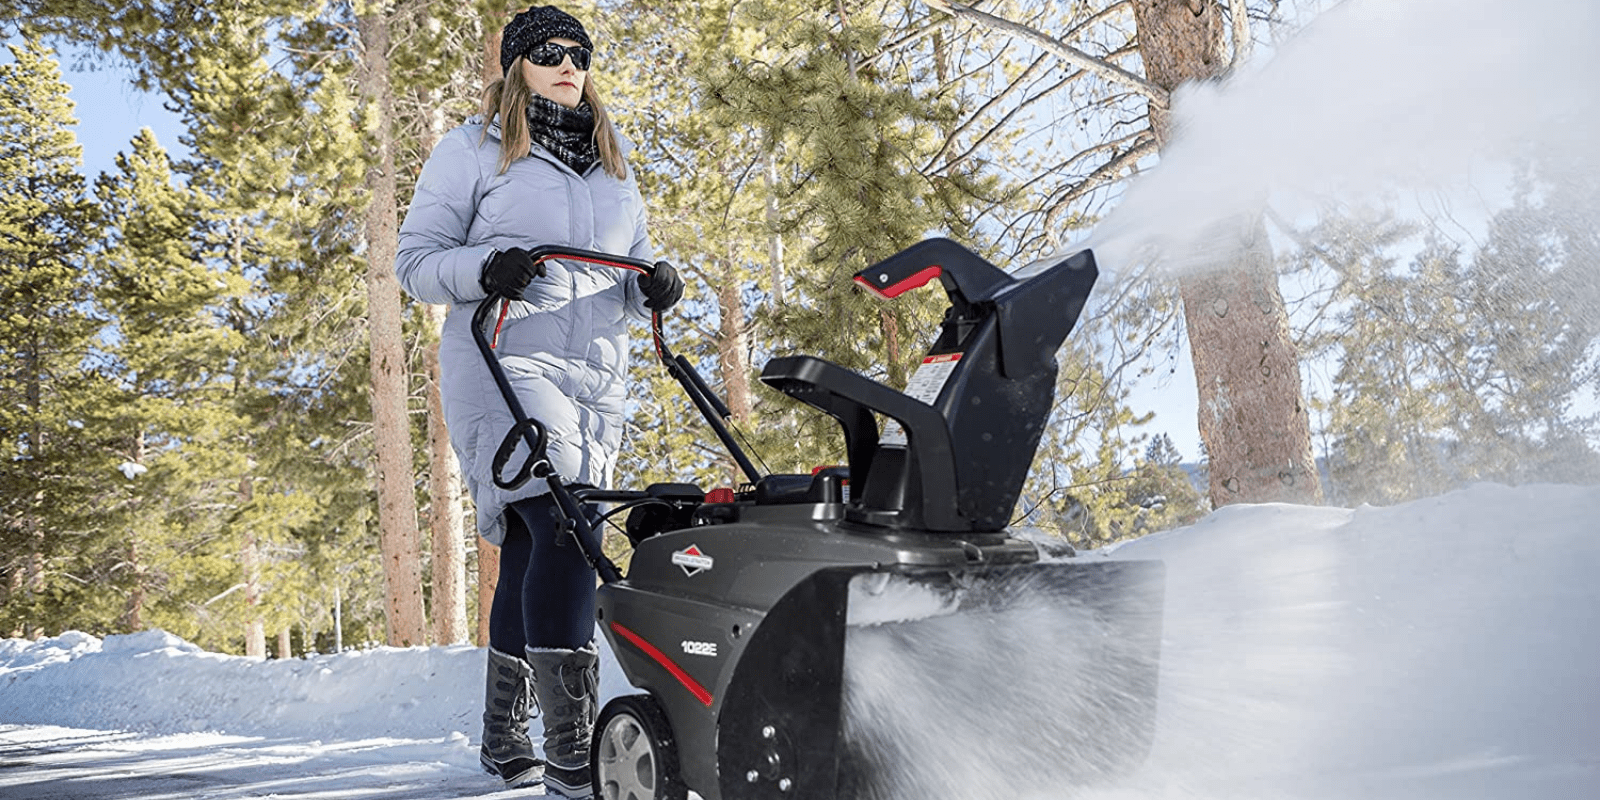 Best commercial snow blowers on amazon